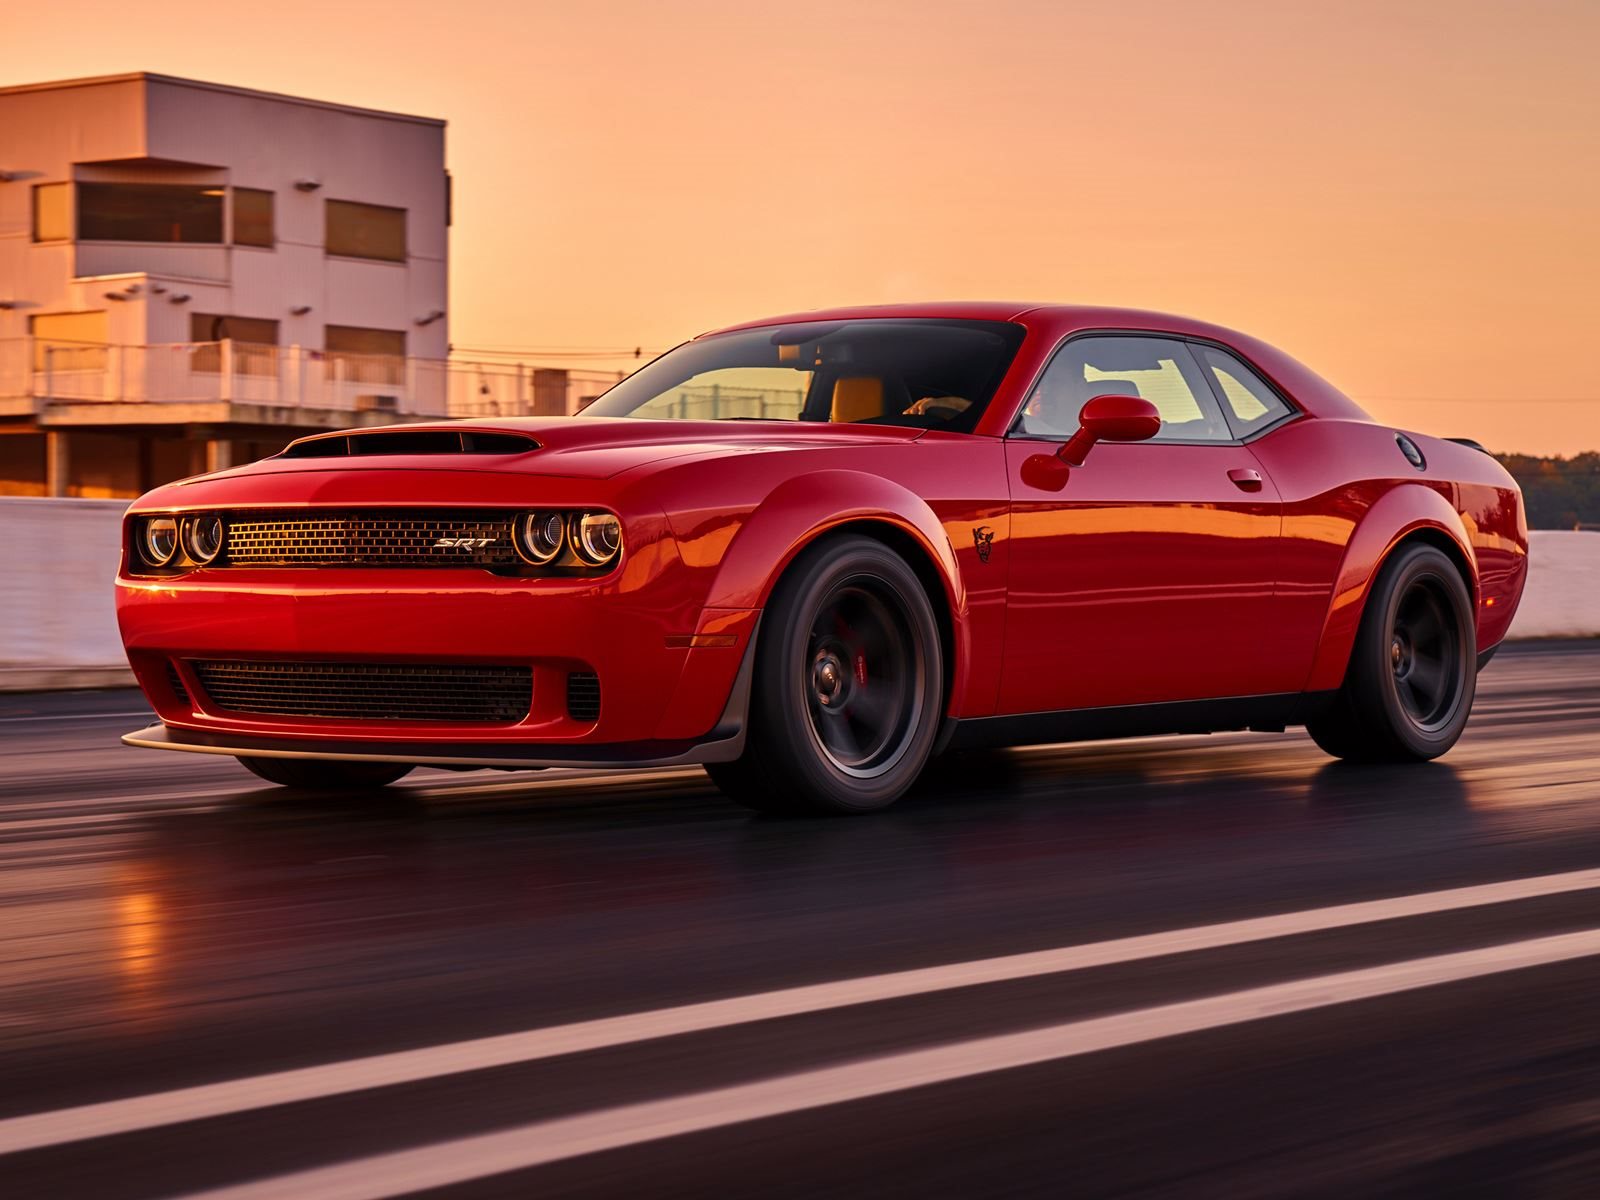 Is The Dodge Challenger The Last True American Muscle Car? - CarBuzz